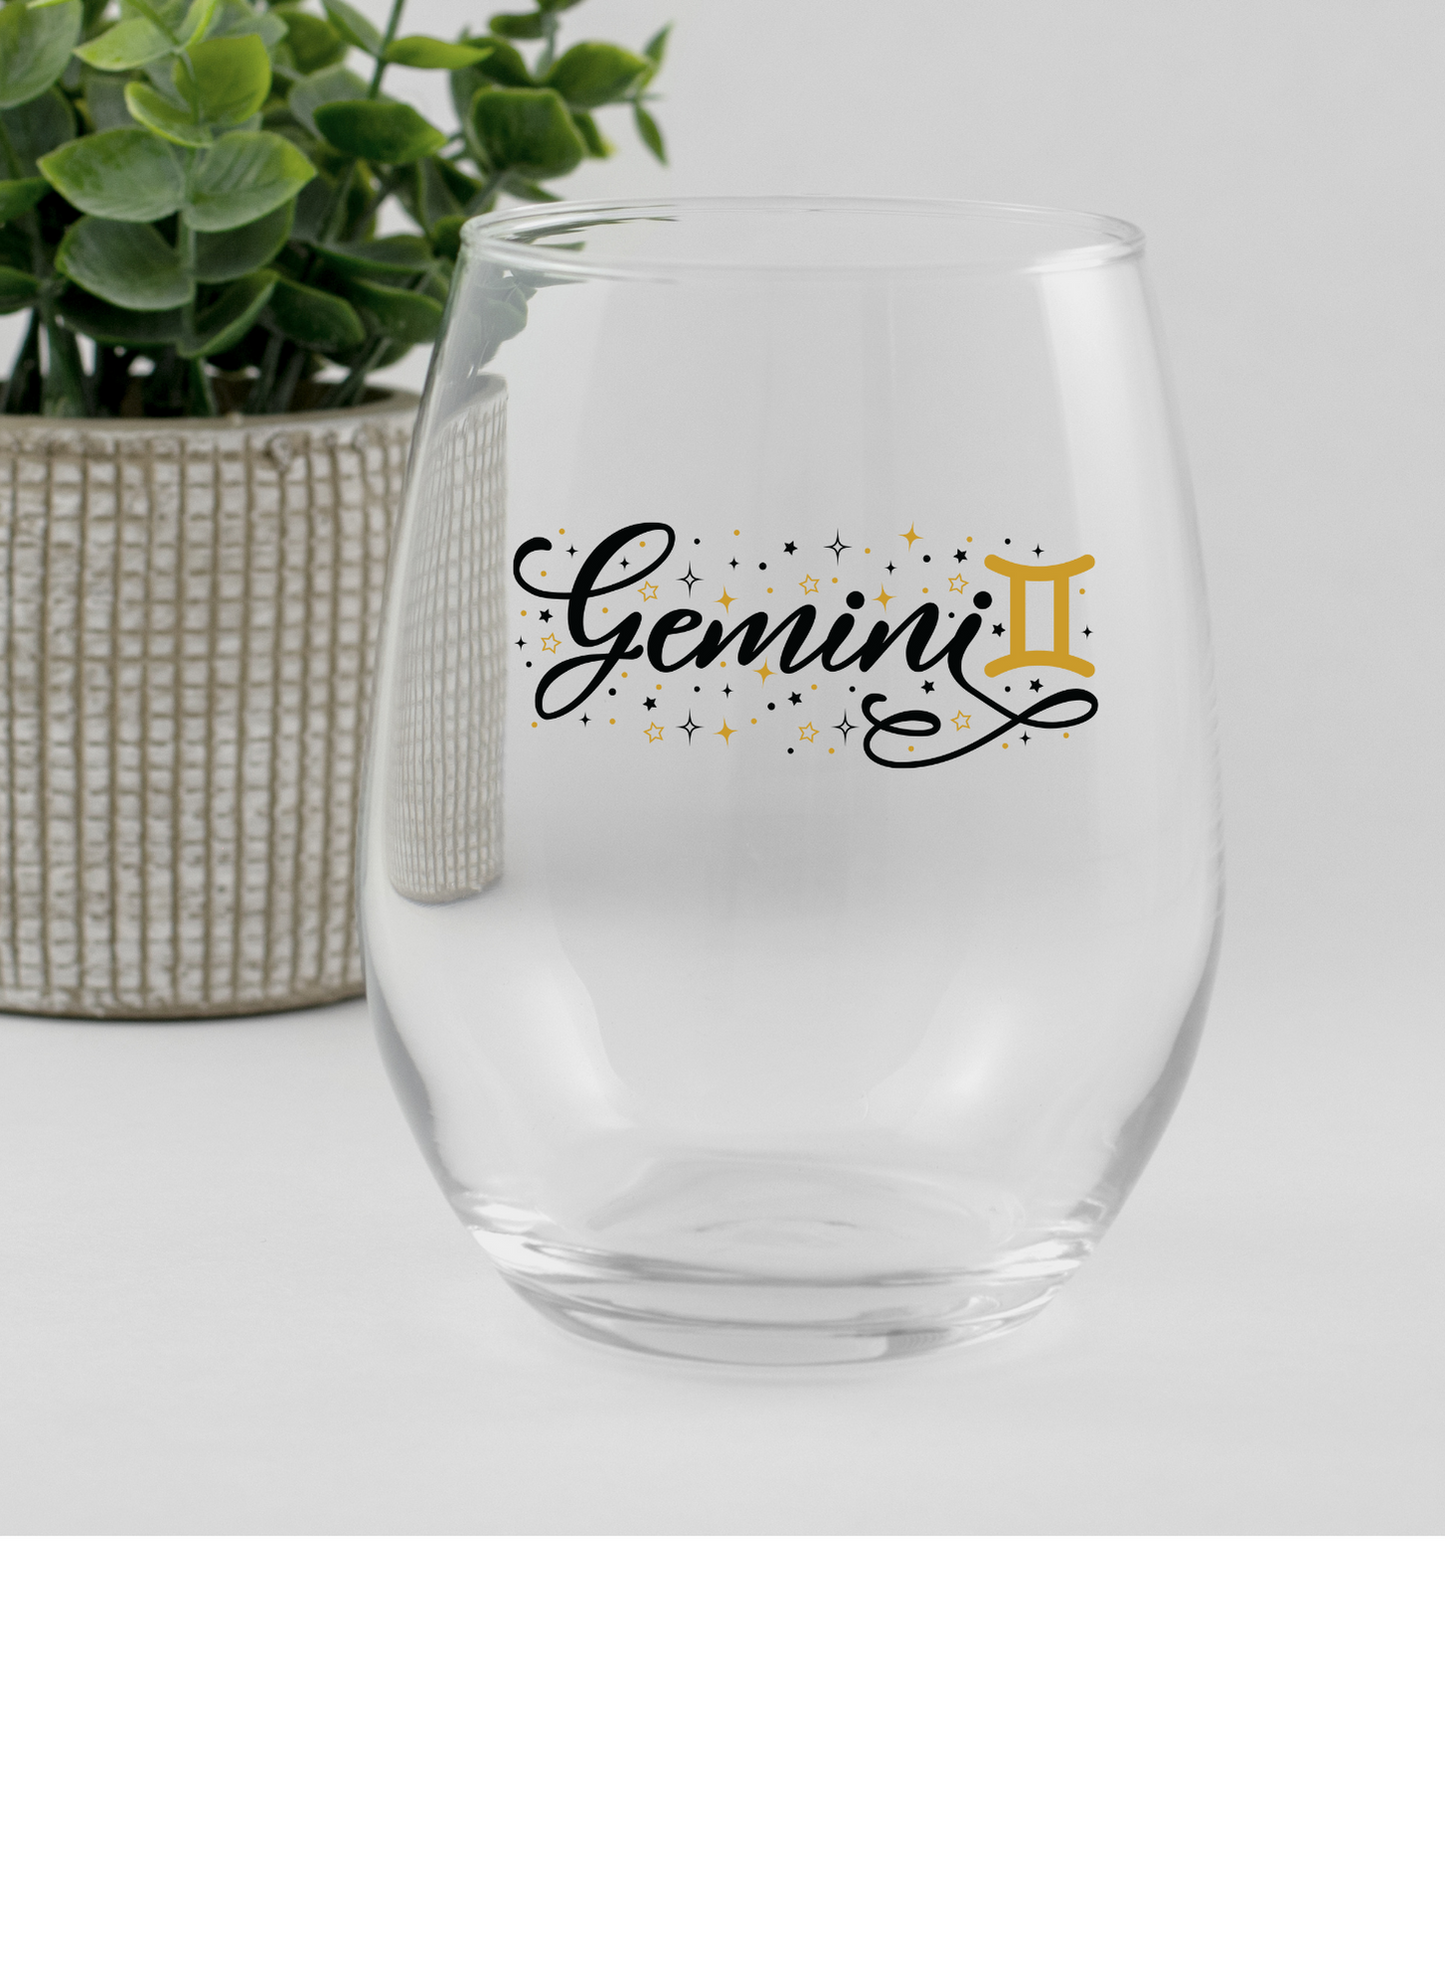 Gemini| UV DTF Wine DECAL (Double Sided image)